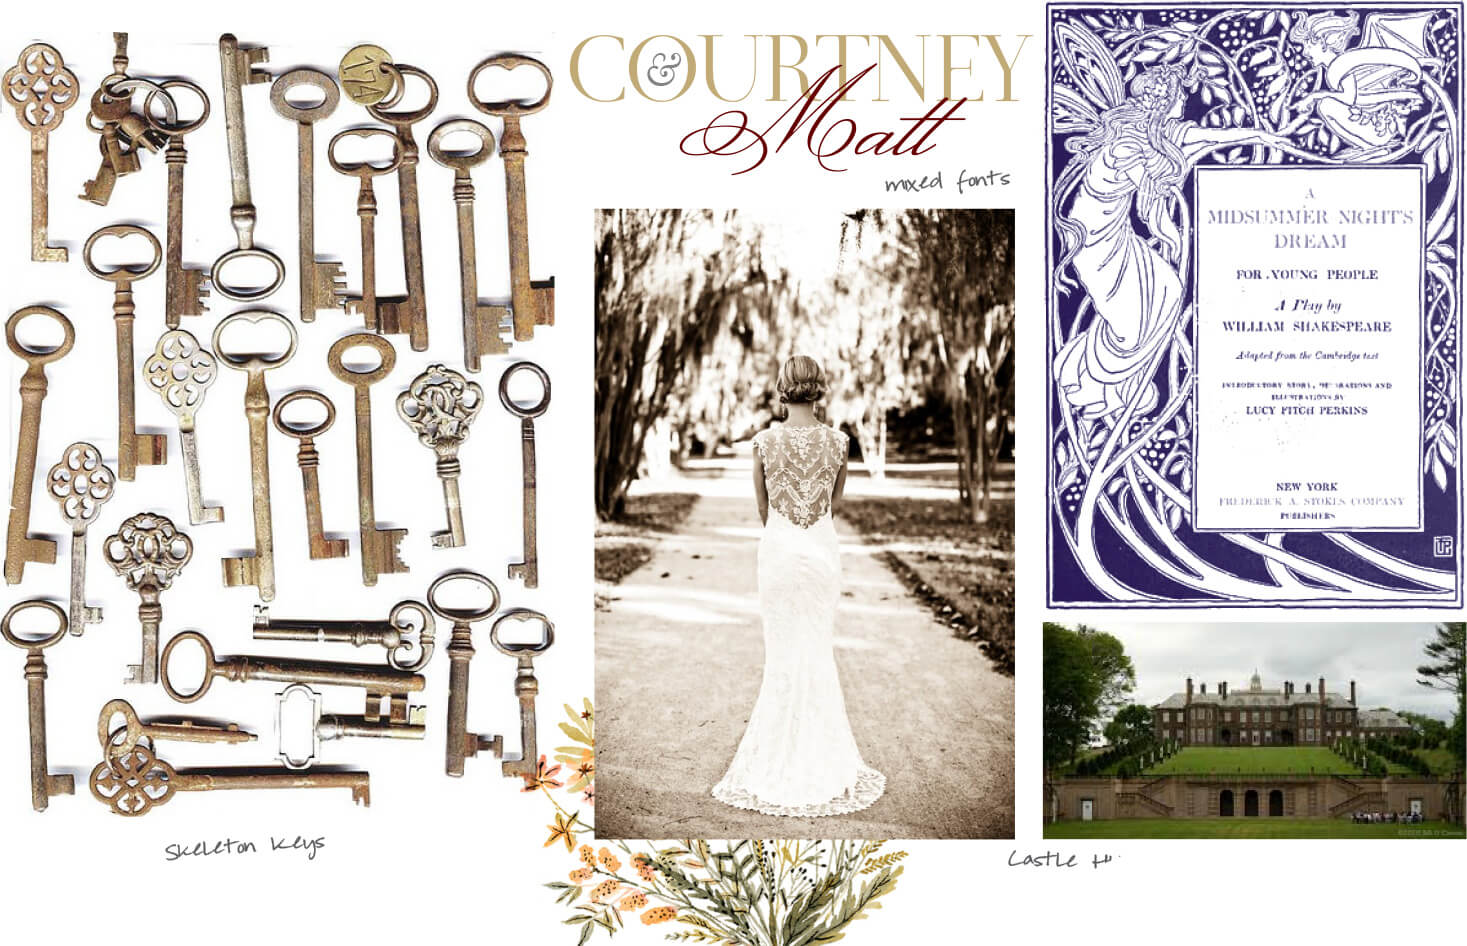 Skeleton keys, lace wedding gowns and castles